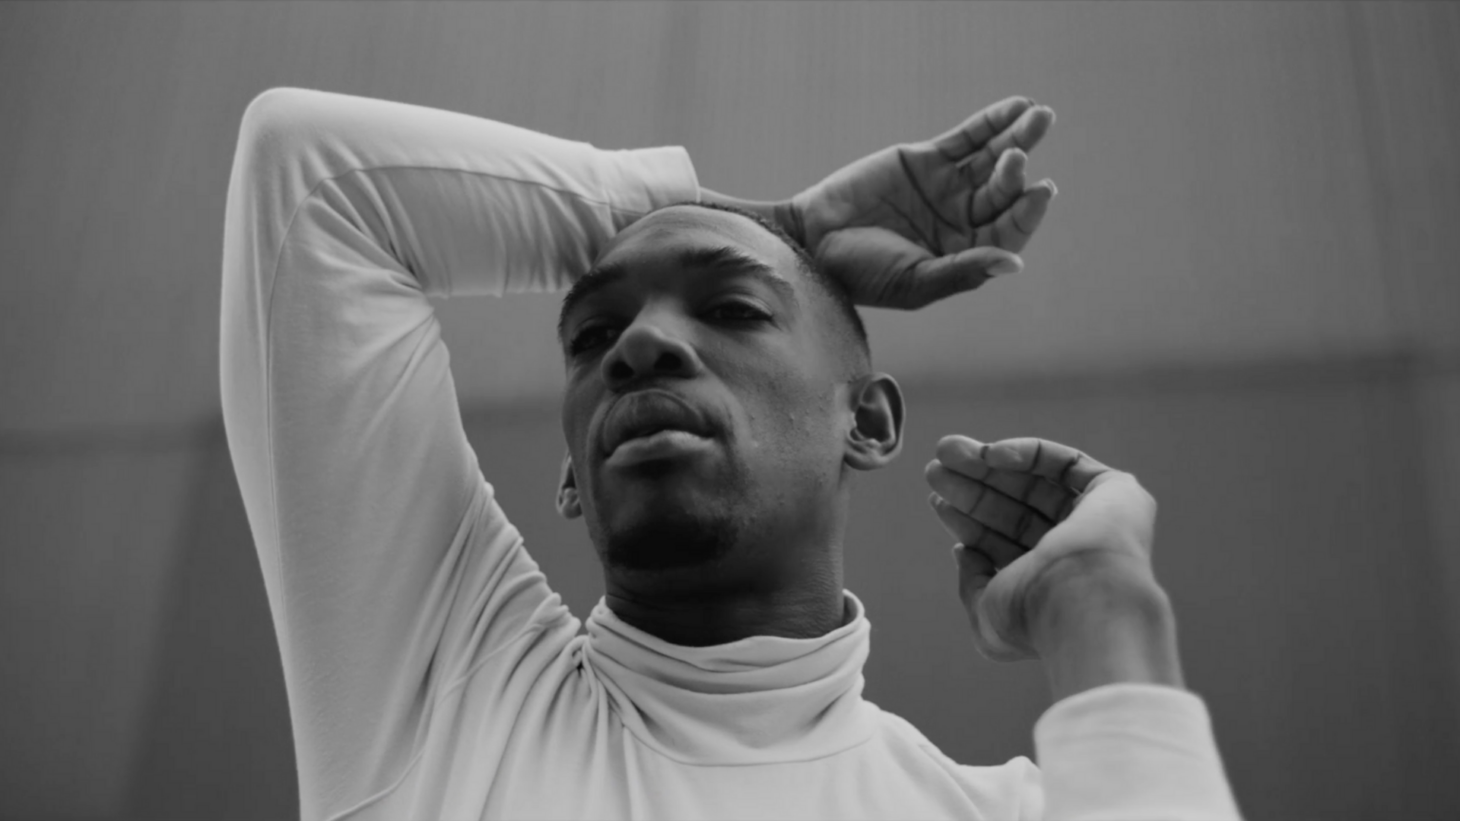 Black and white still from the film The Language of Jay Jay Revlon, wearing a white turtleneck, with his right arm raised.